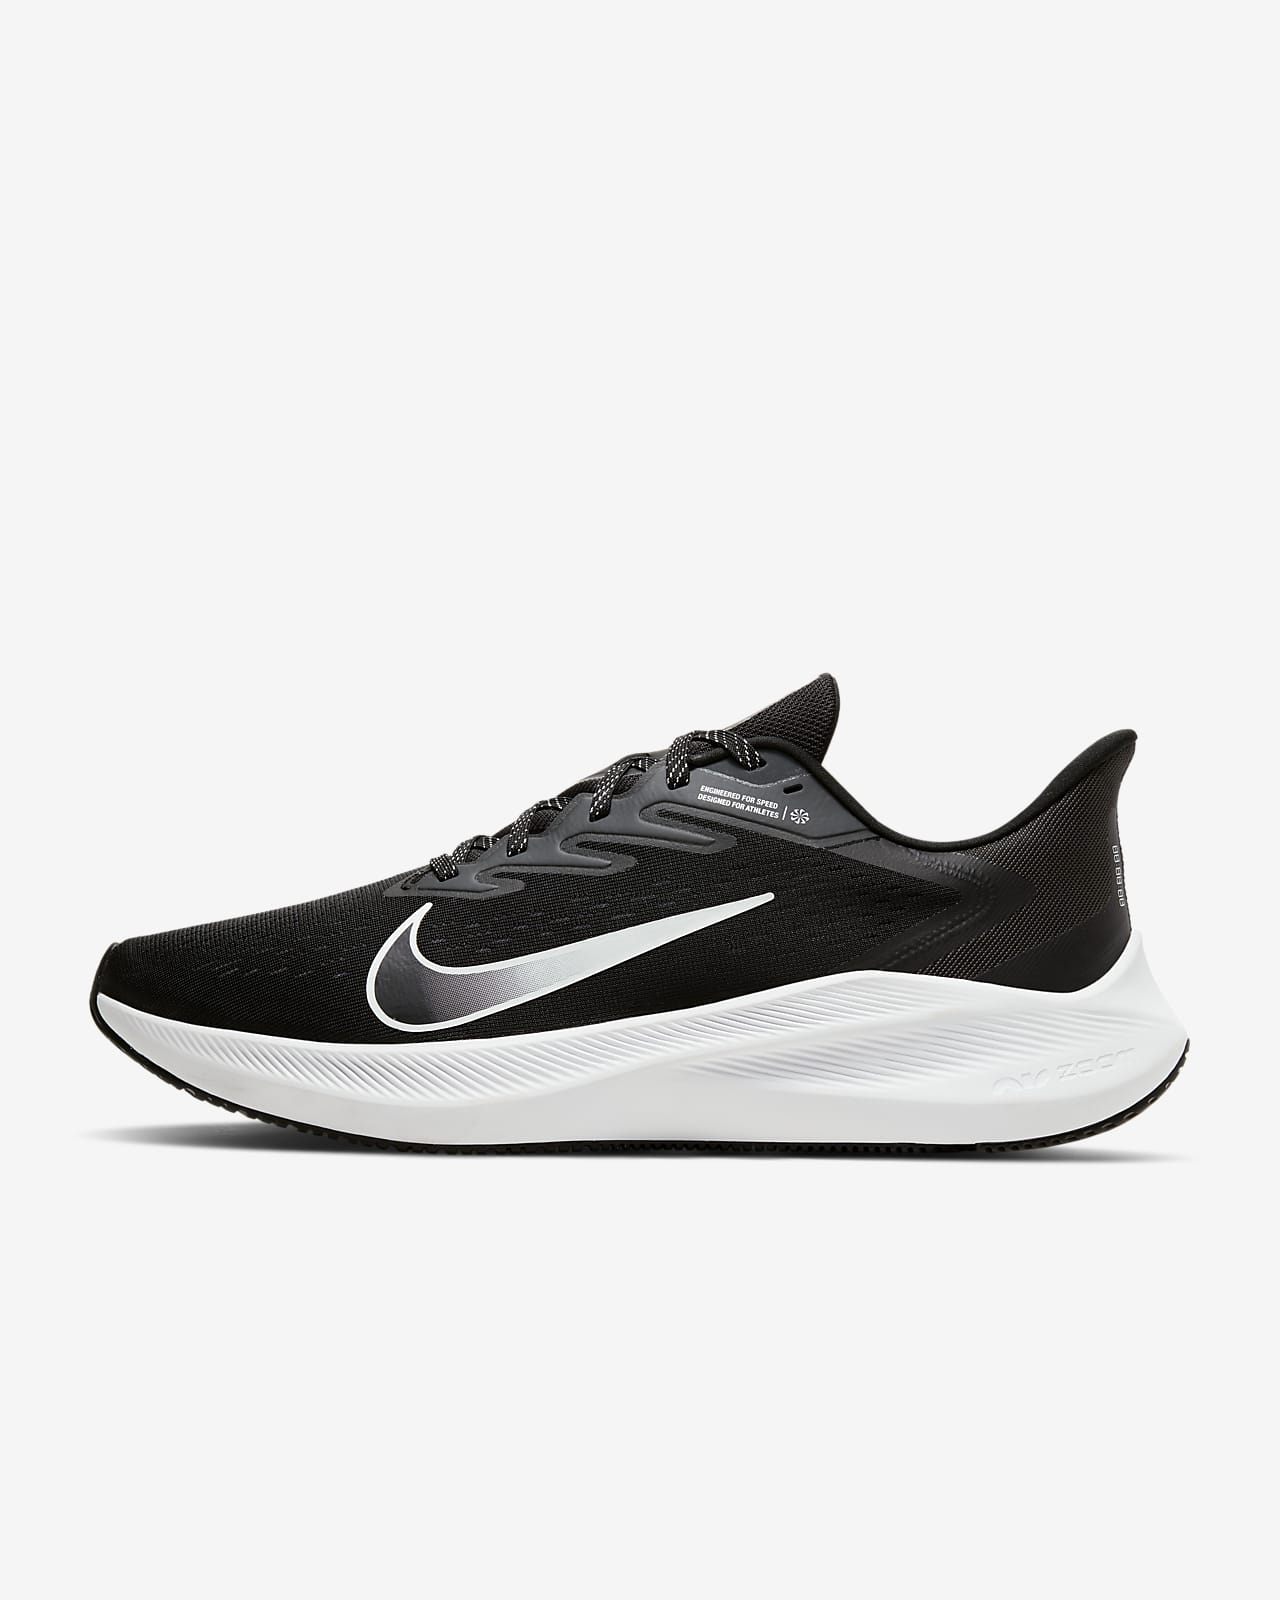 Chaussure de running Nike Air Zoom Winflo 7 pour Homme